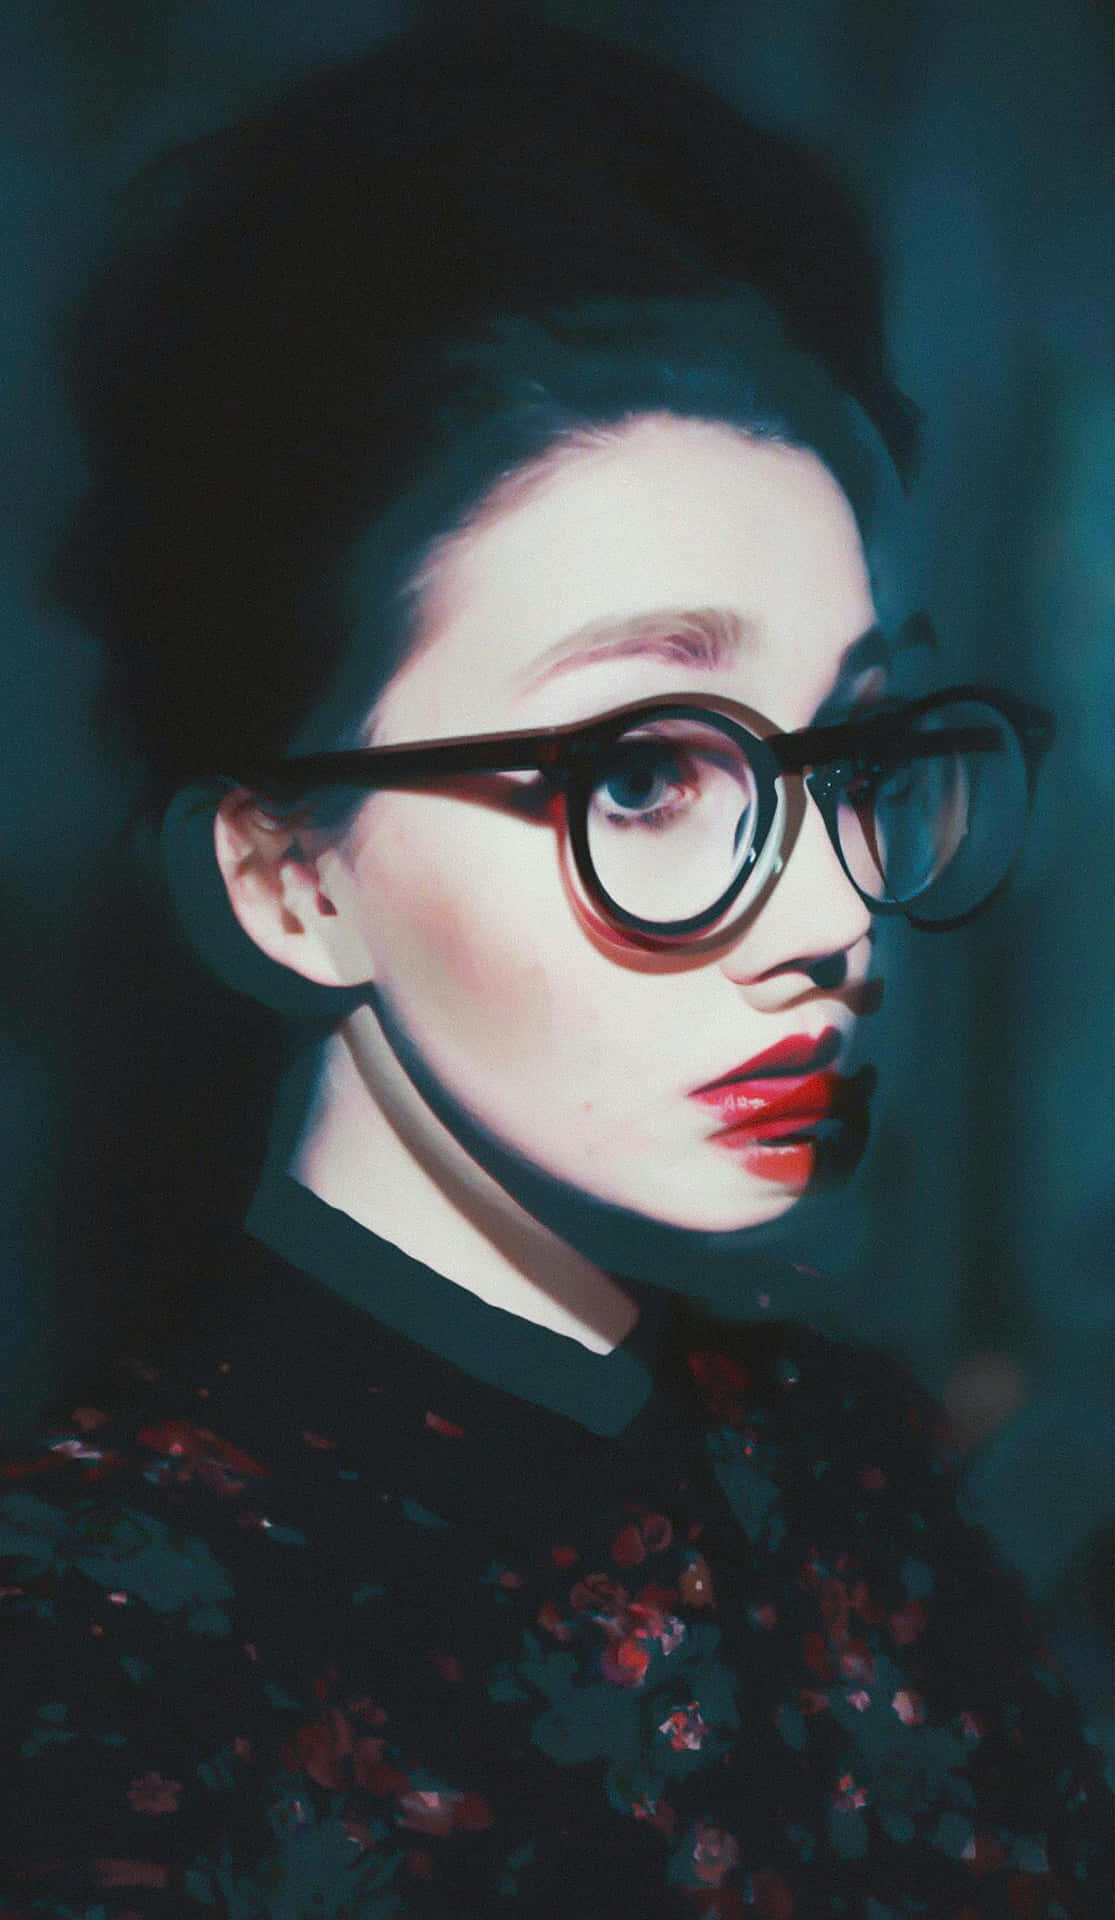 Stylish Portraitwith Red Lipsand Glasses Wallpaper